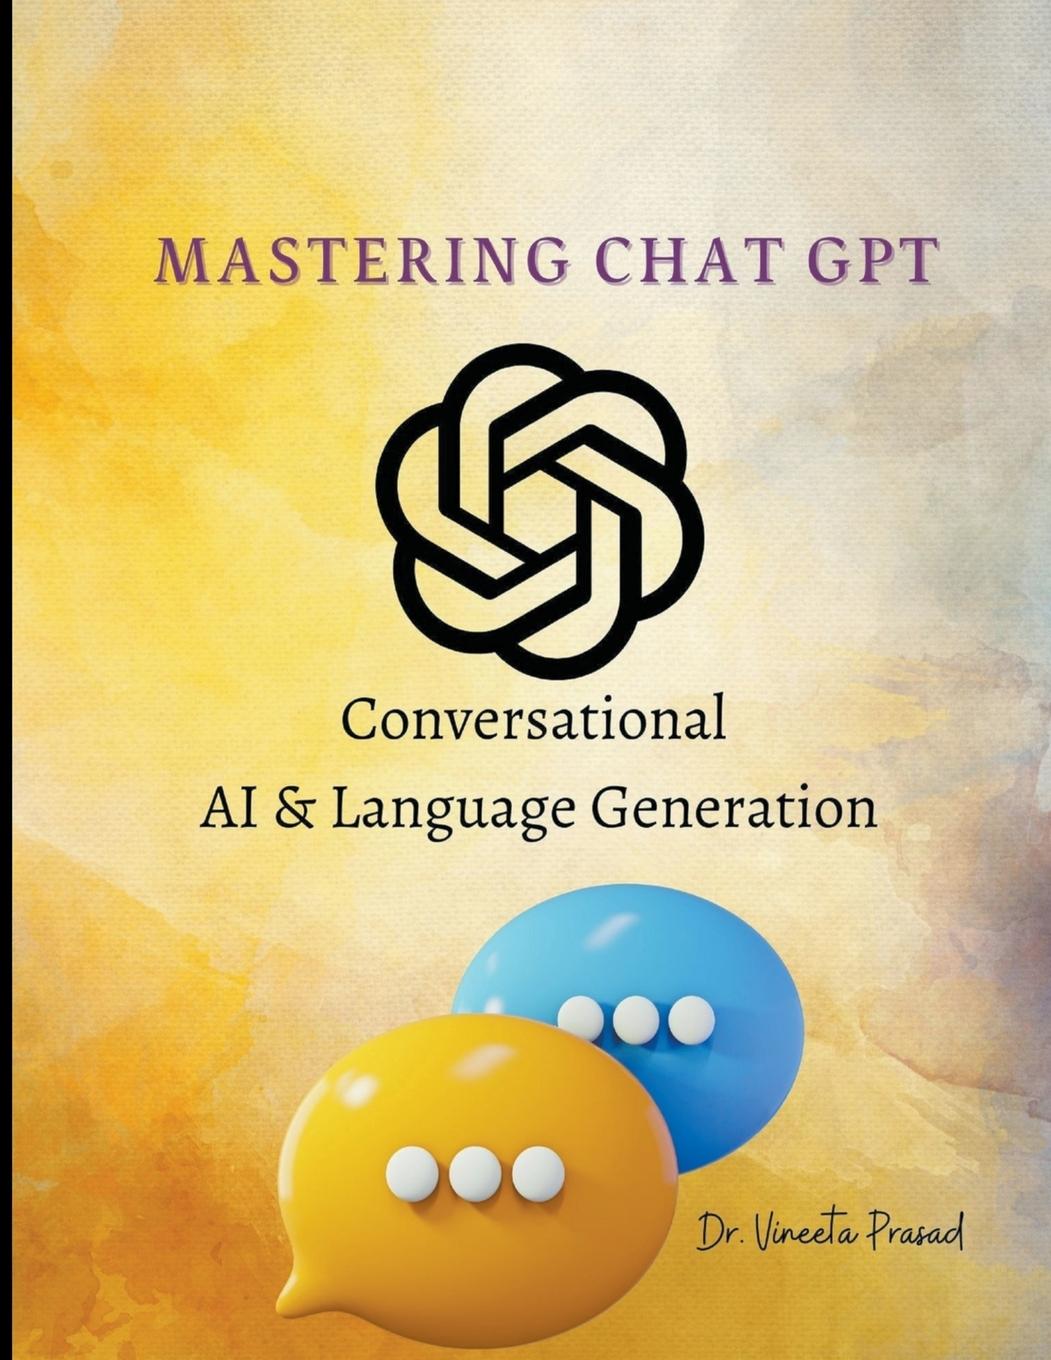 Book Mastering Chat GPT 